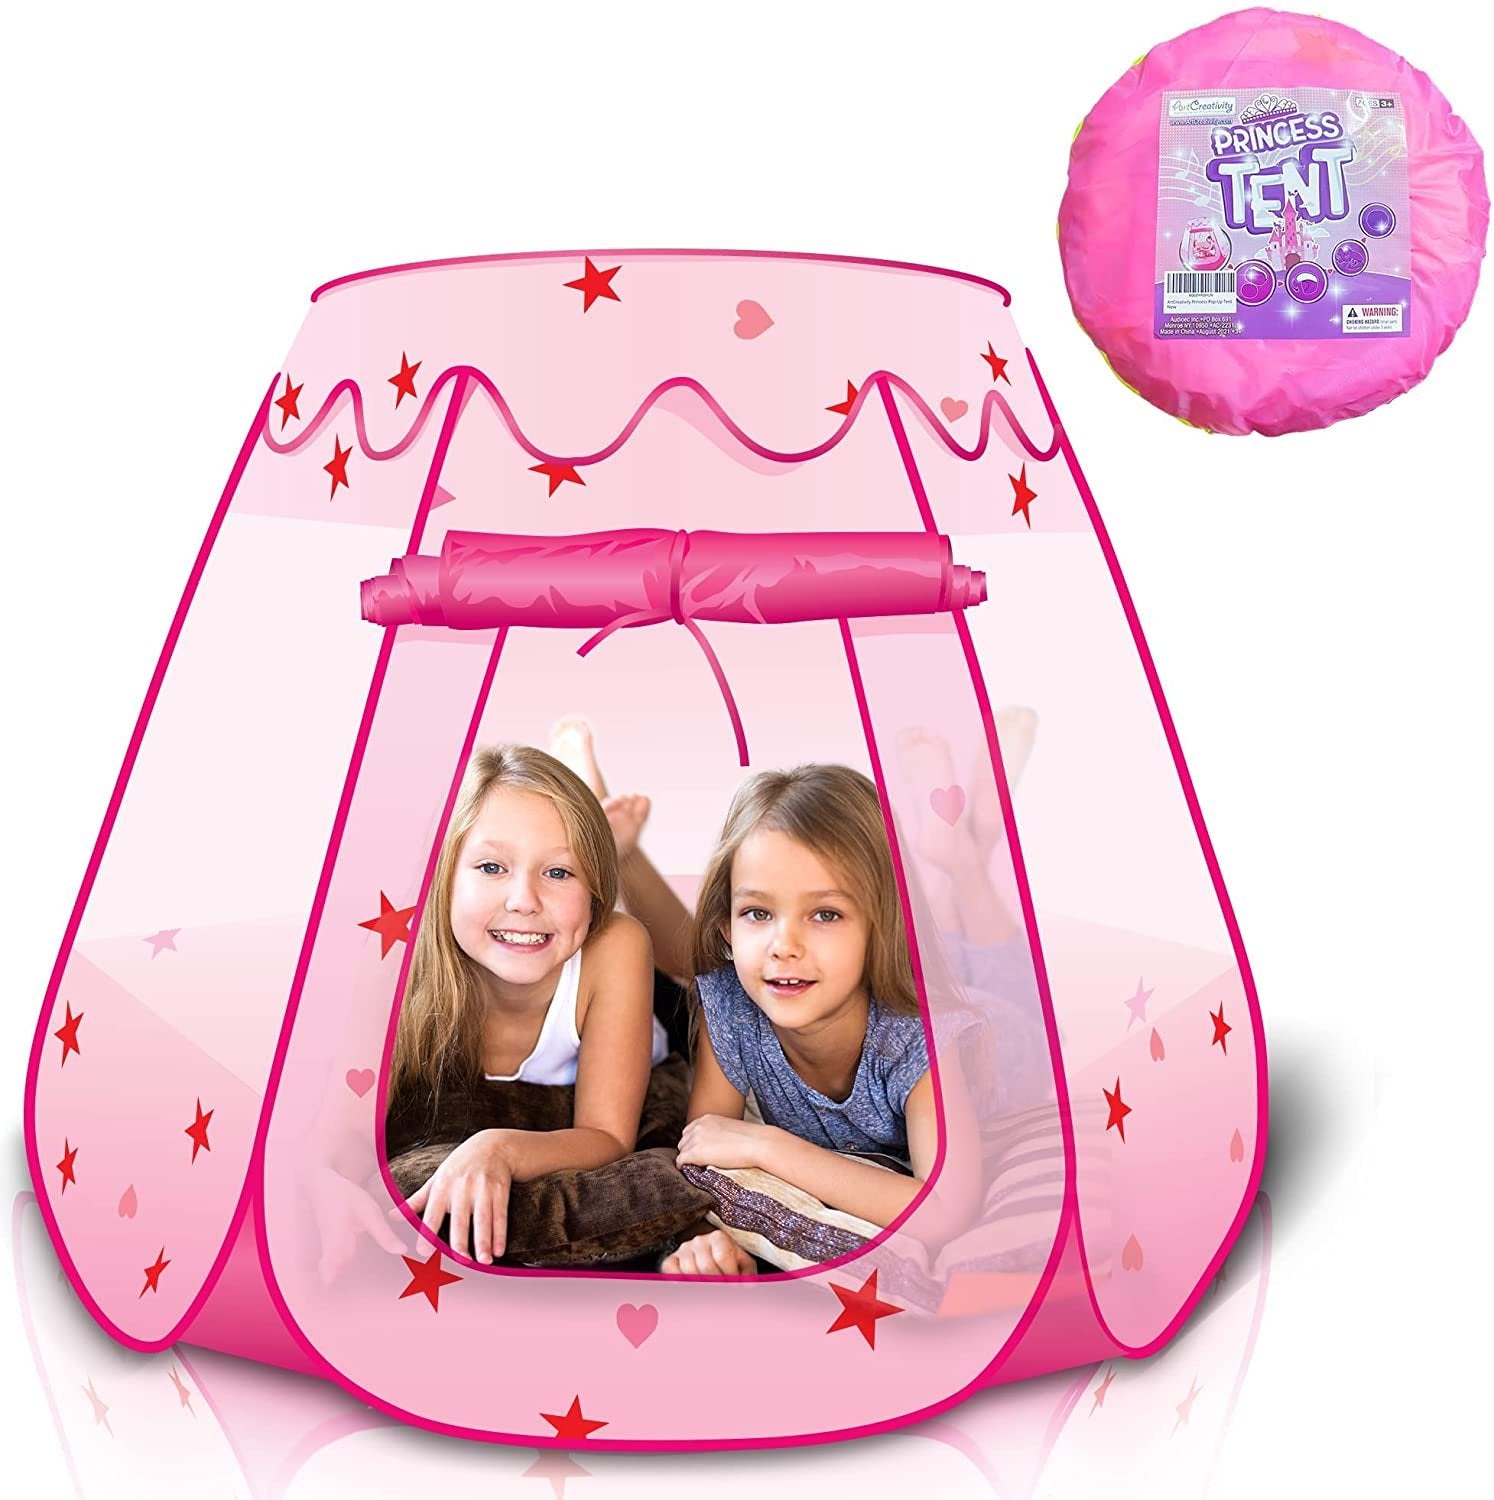 Princess Pop Up Tent, Kids Playhouse Tent with a Carry Bag, Foldable Princess Tent for Girls and Boys with Mesh Windows for Ventilation, Adorable Princess Party Decorations, Pink